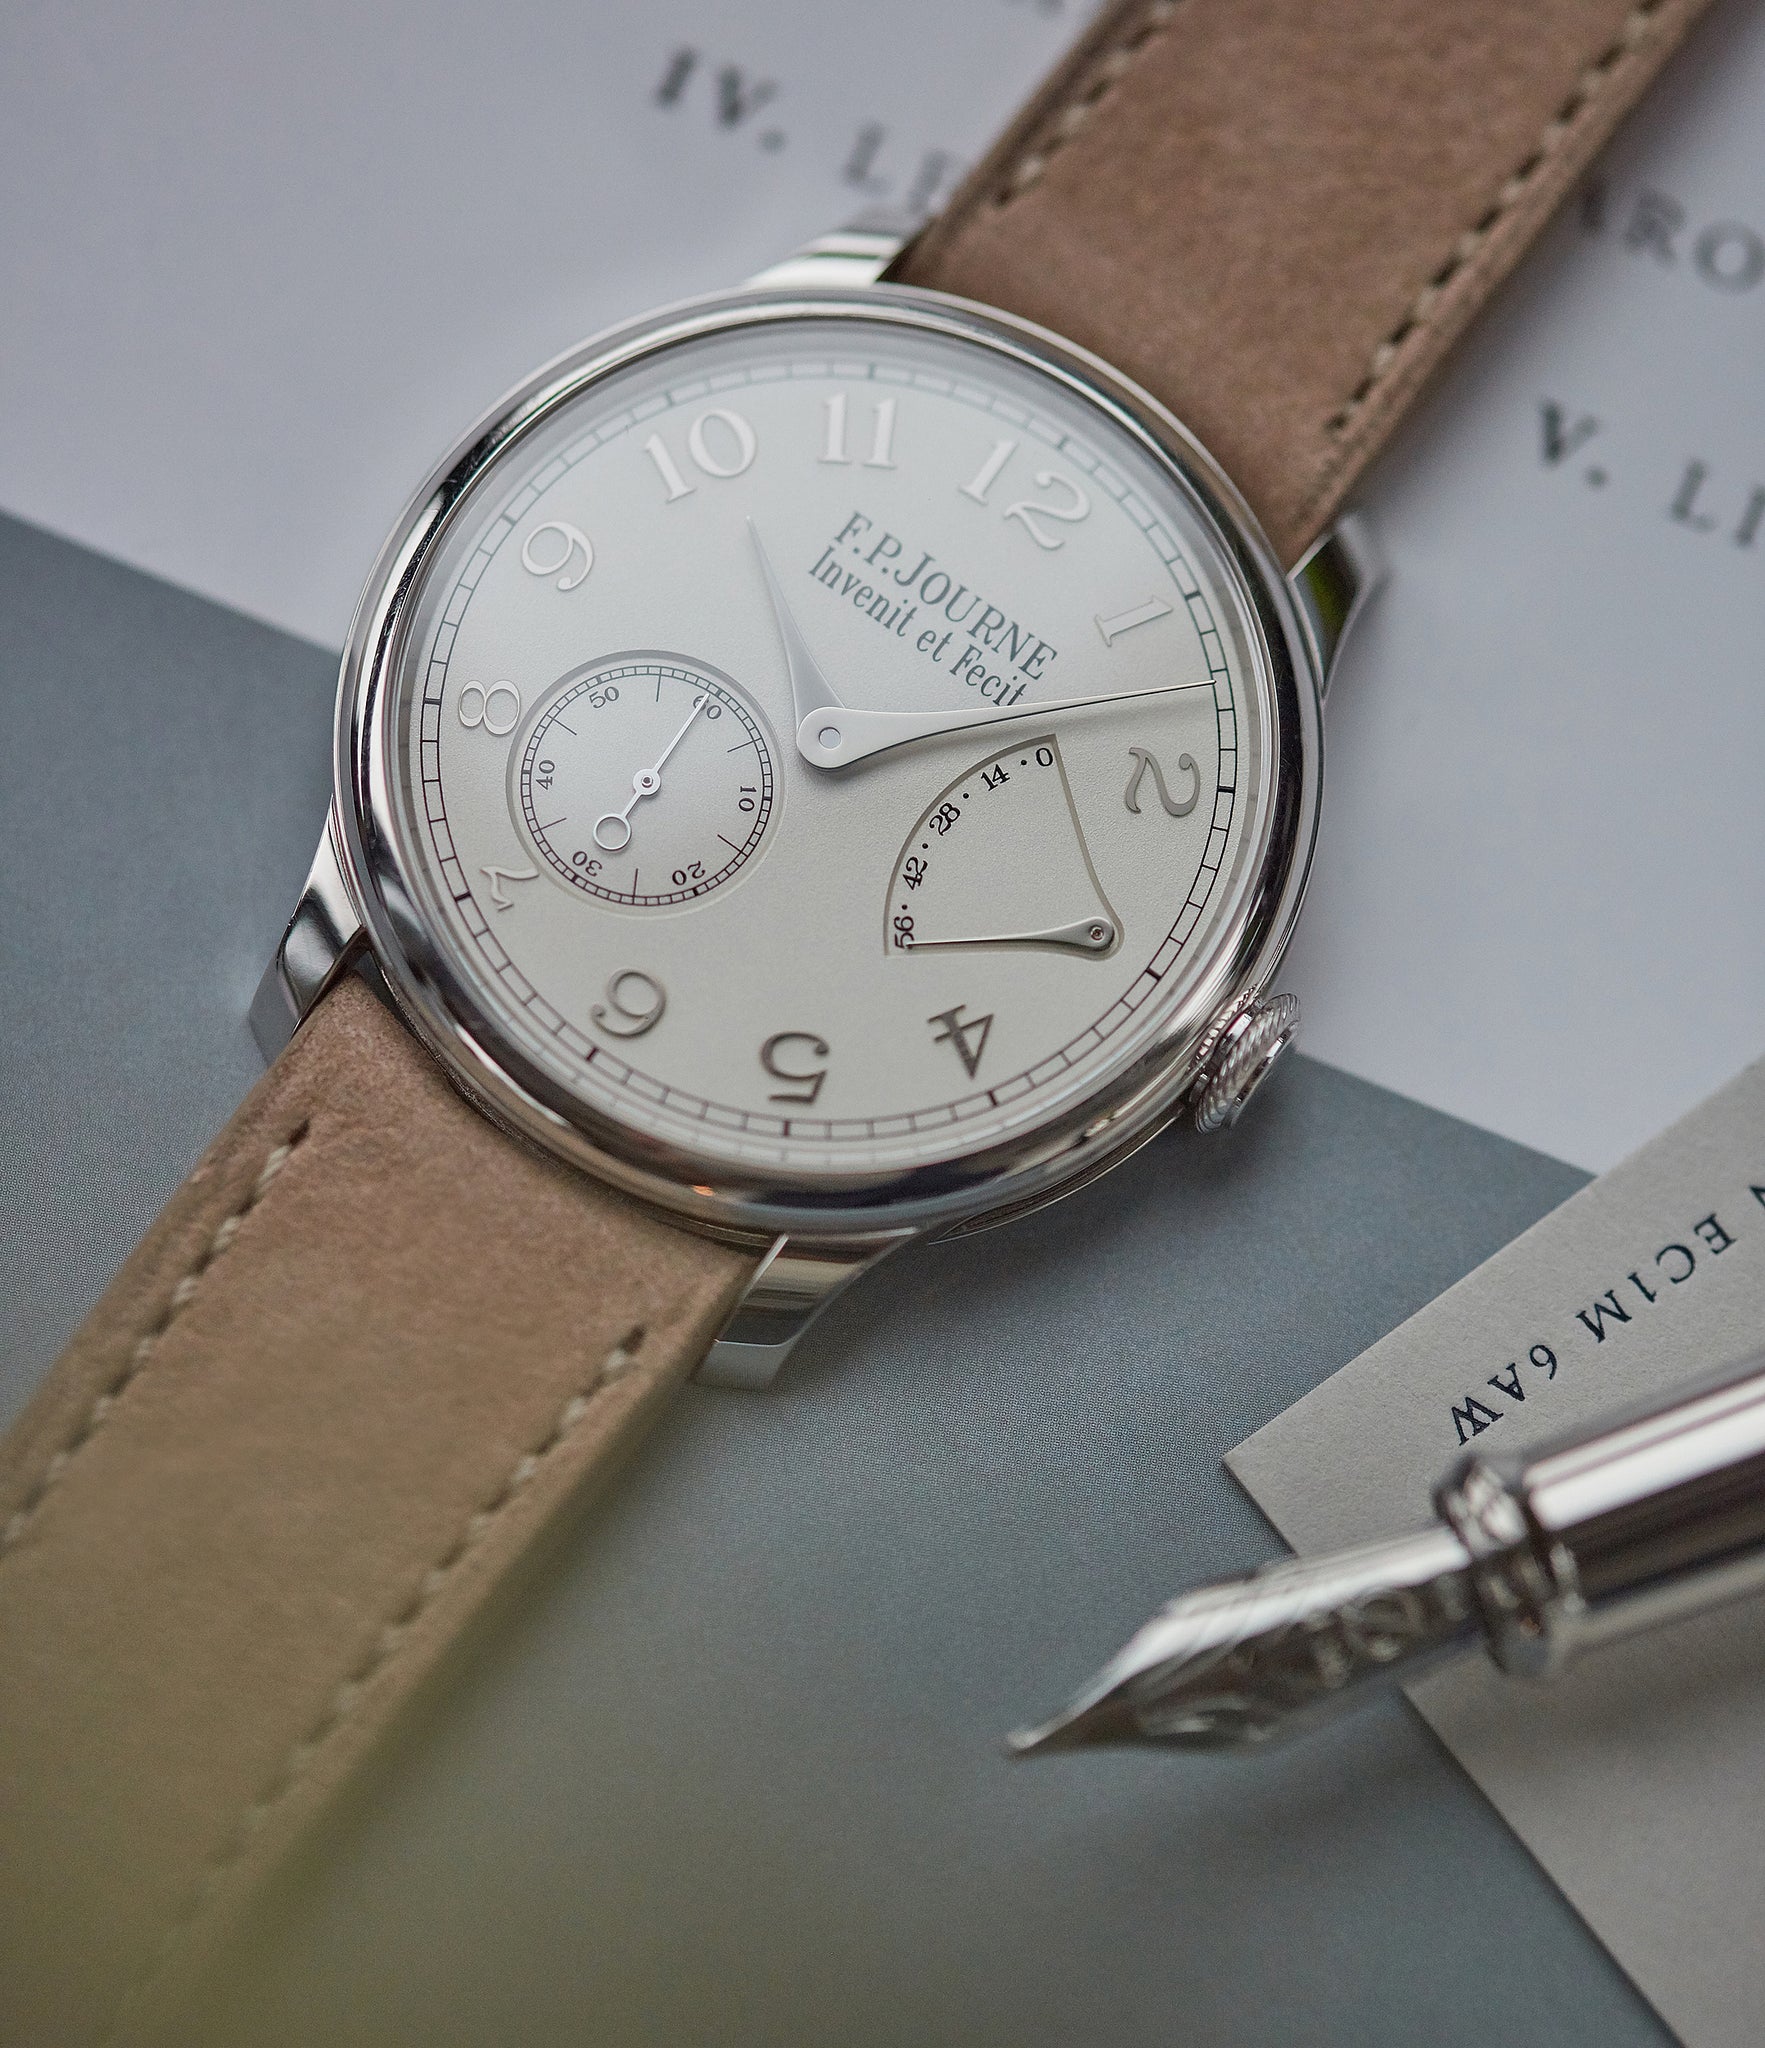 sell F. P. Journe Chronometre Souverain 38mm platinum silver custom dial for sale online at A Collected Man London UK specialist of independent watchmakers